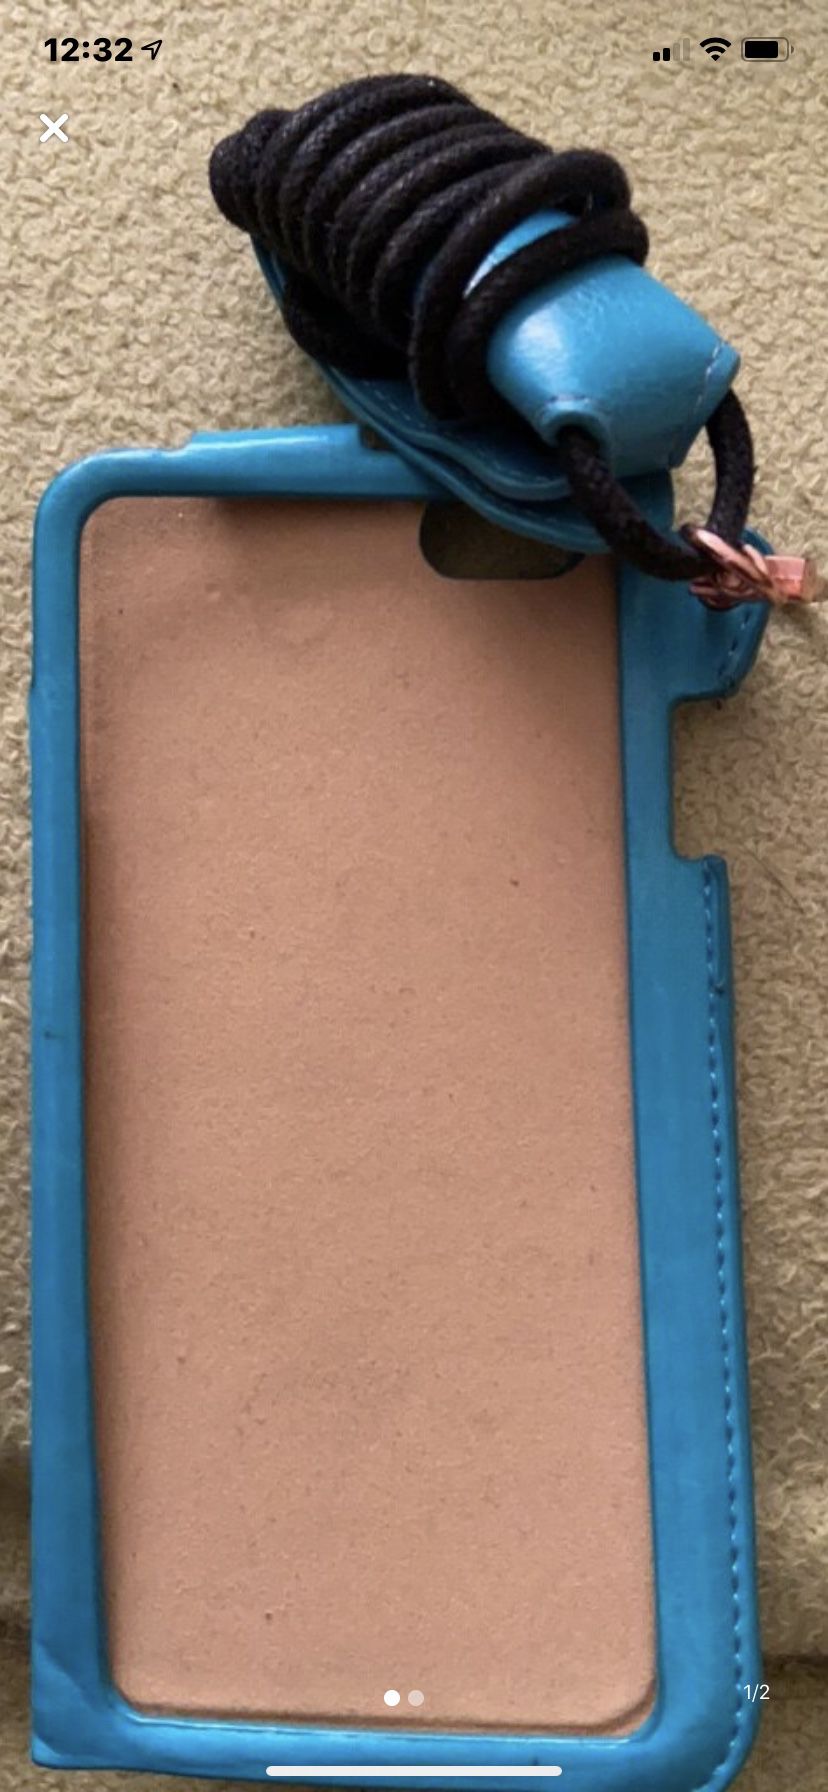 iPhone 6 Leather Case